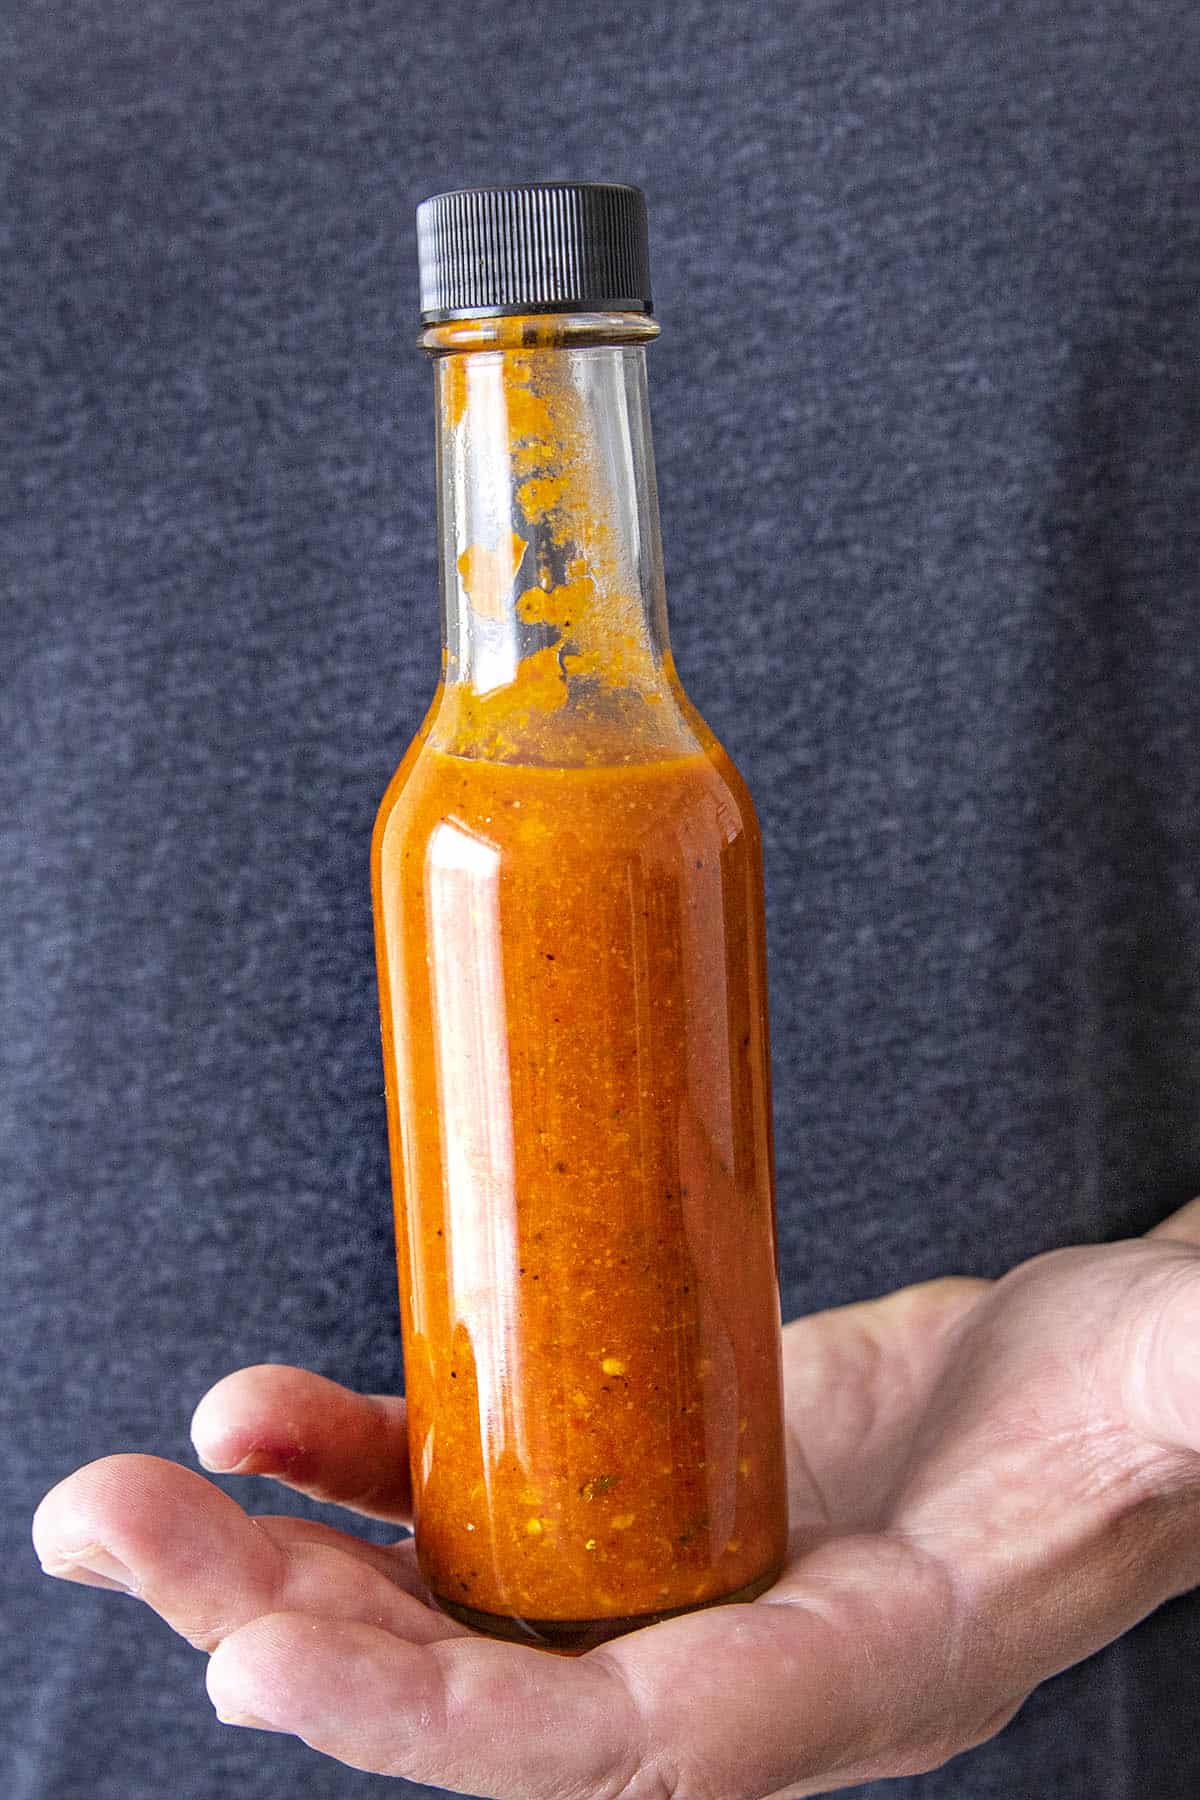 Does Tabasco Sauce Expire? Find Out Before Your Next Spicy Meal!